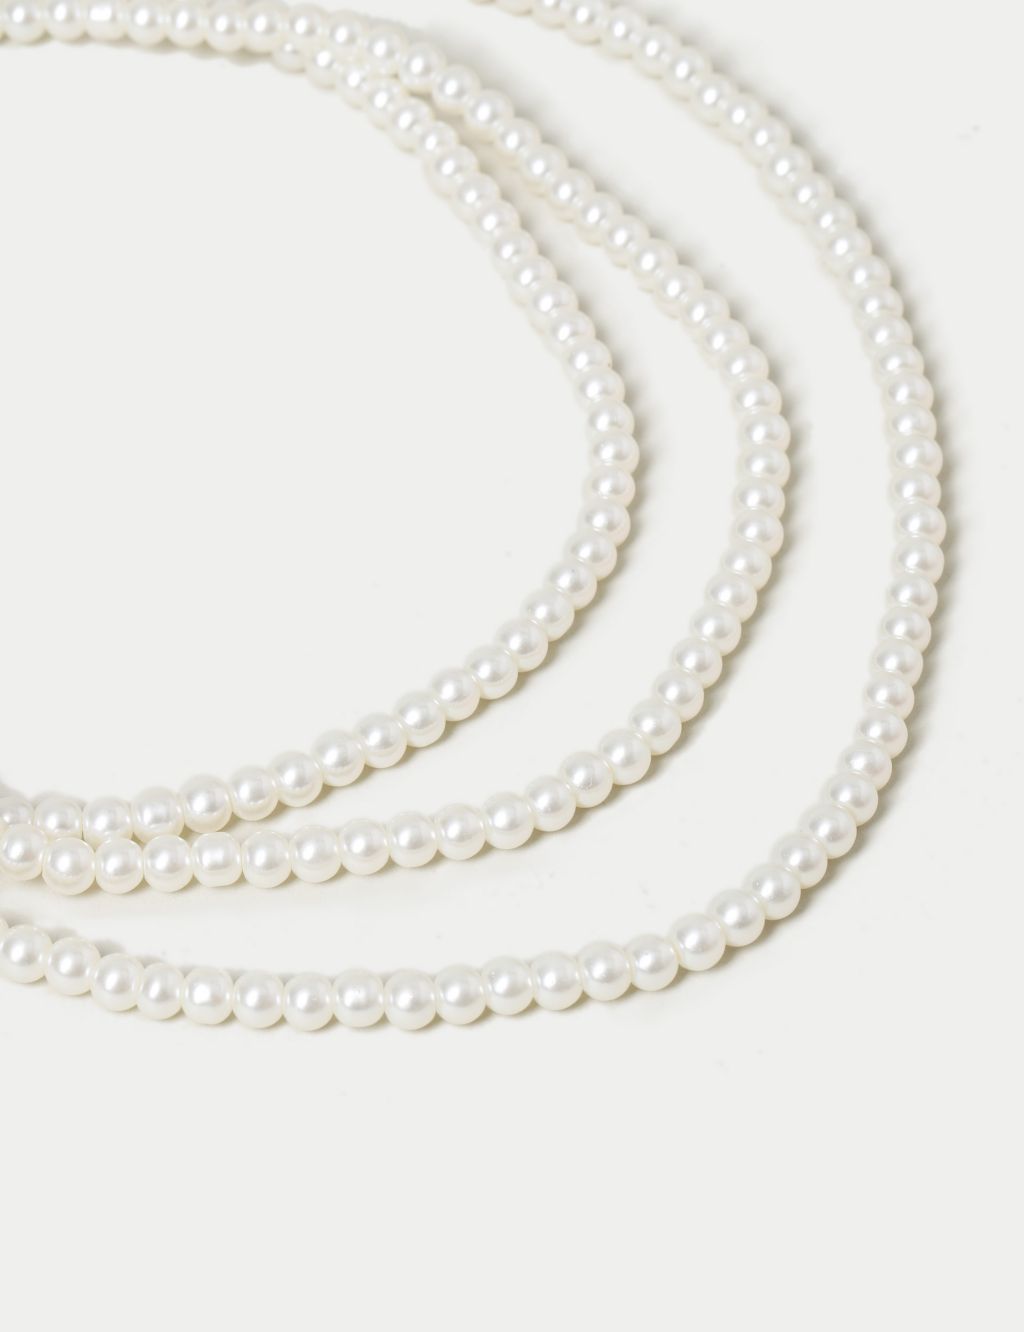 Multirow Pearl Necklace image 2